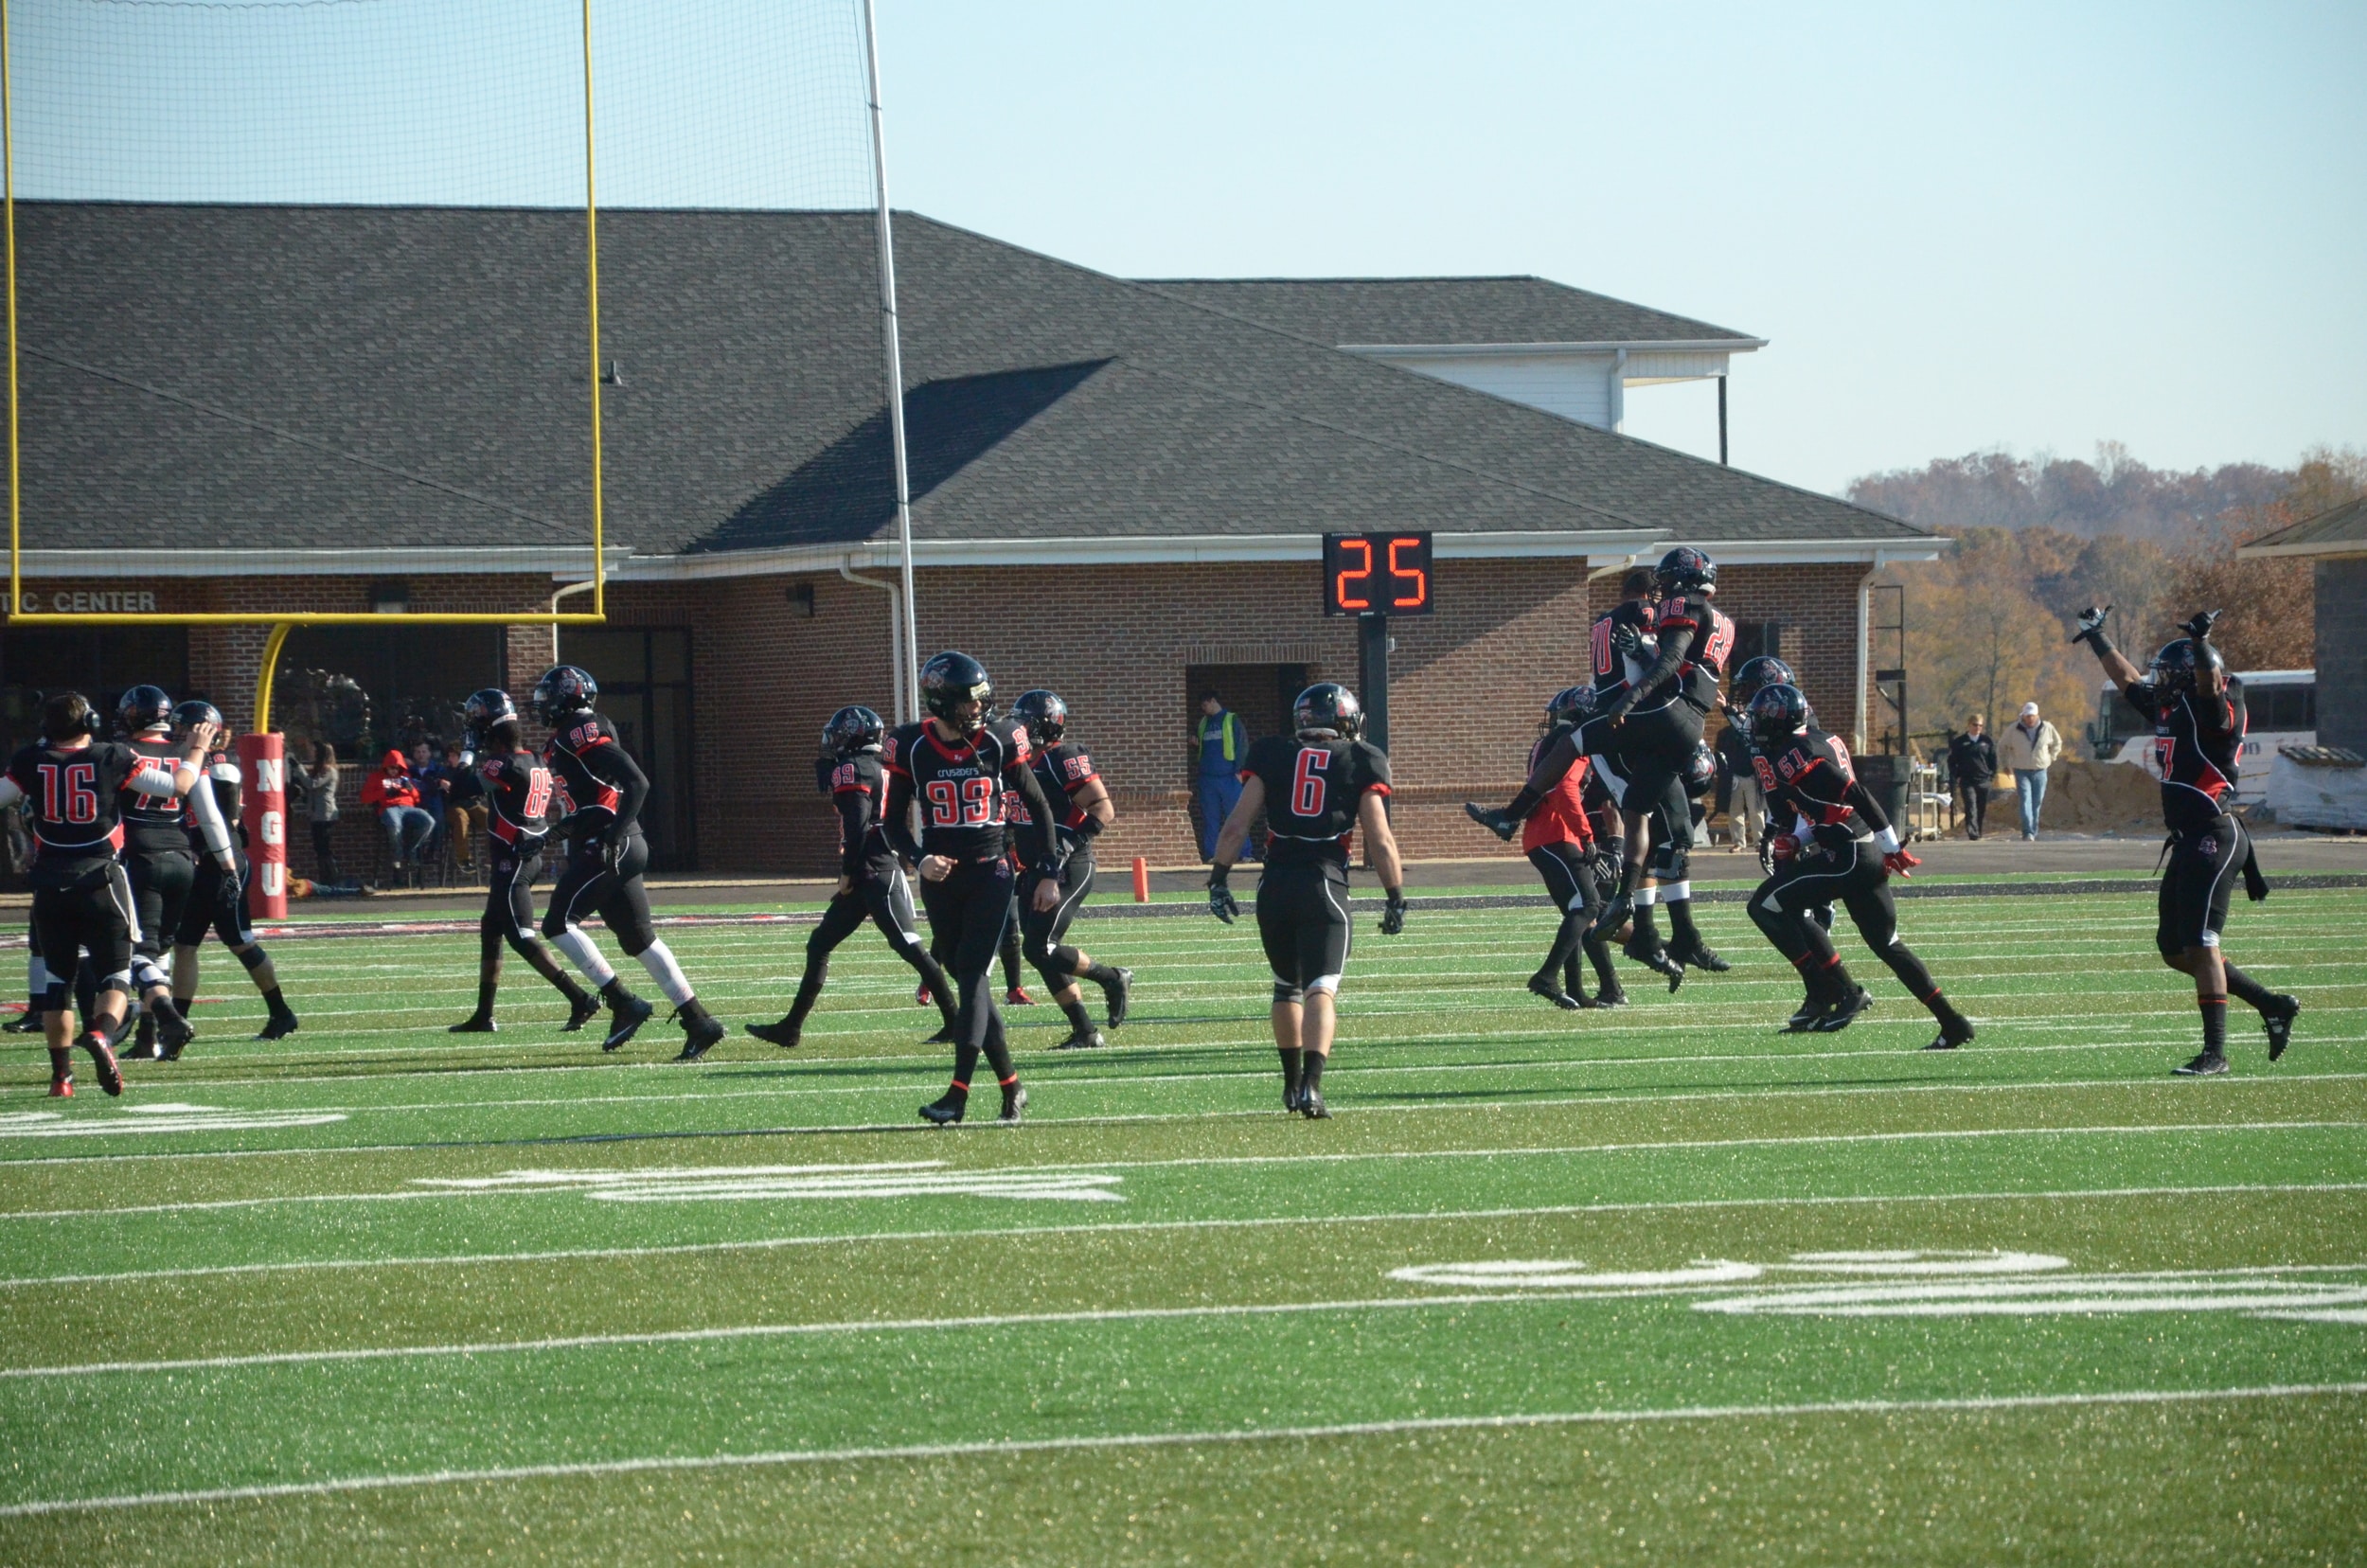  Some excited Crusaders make an exclamatory jump after a successful touchdown. 